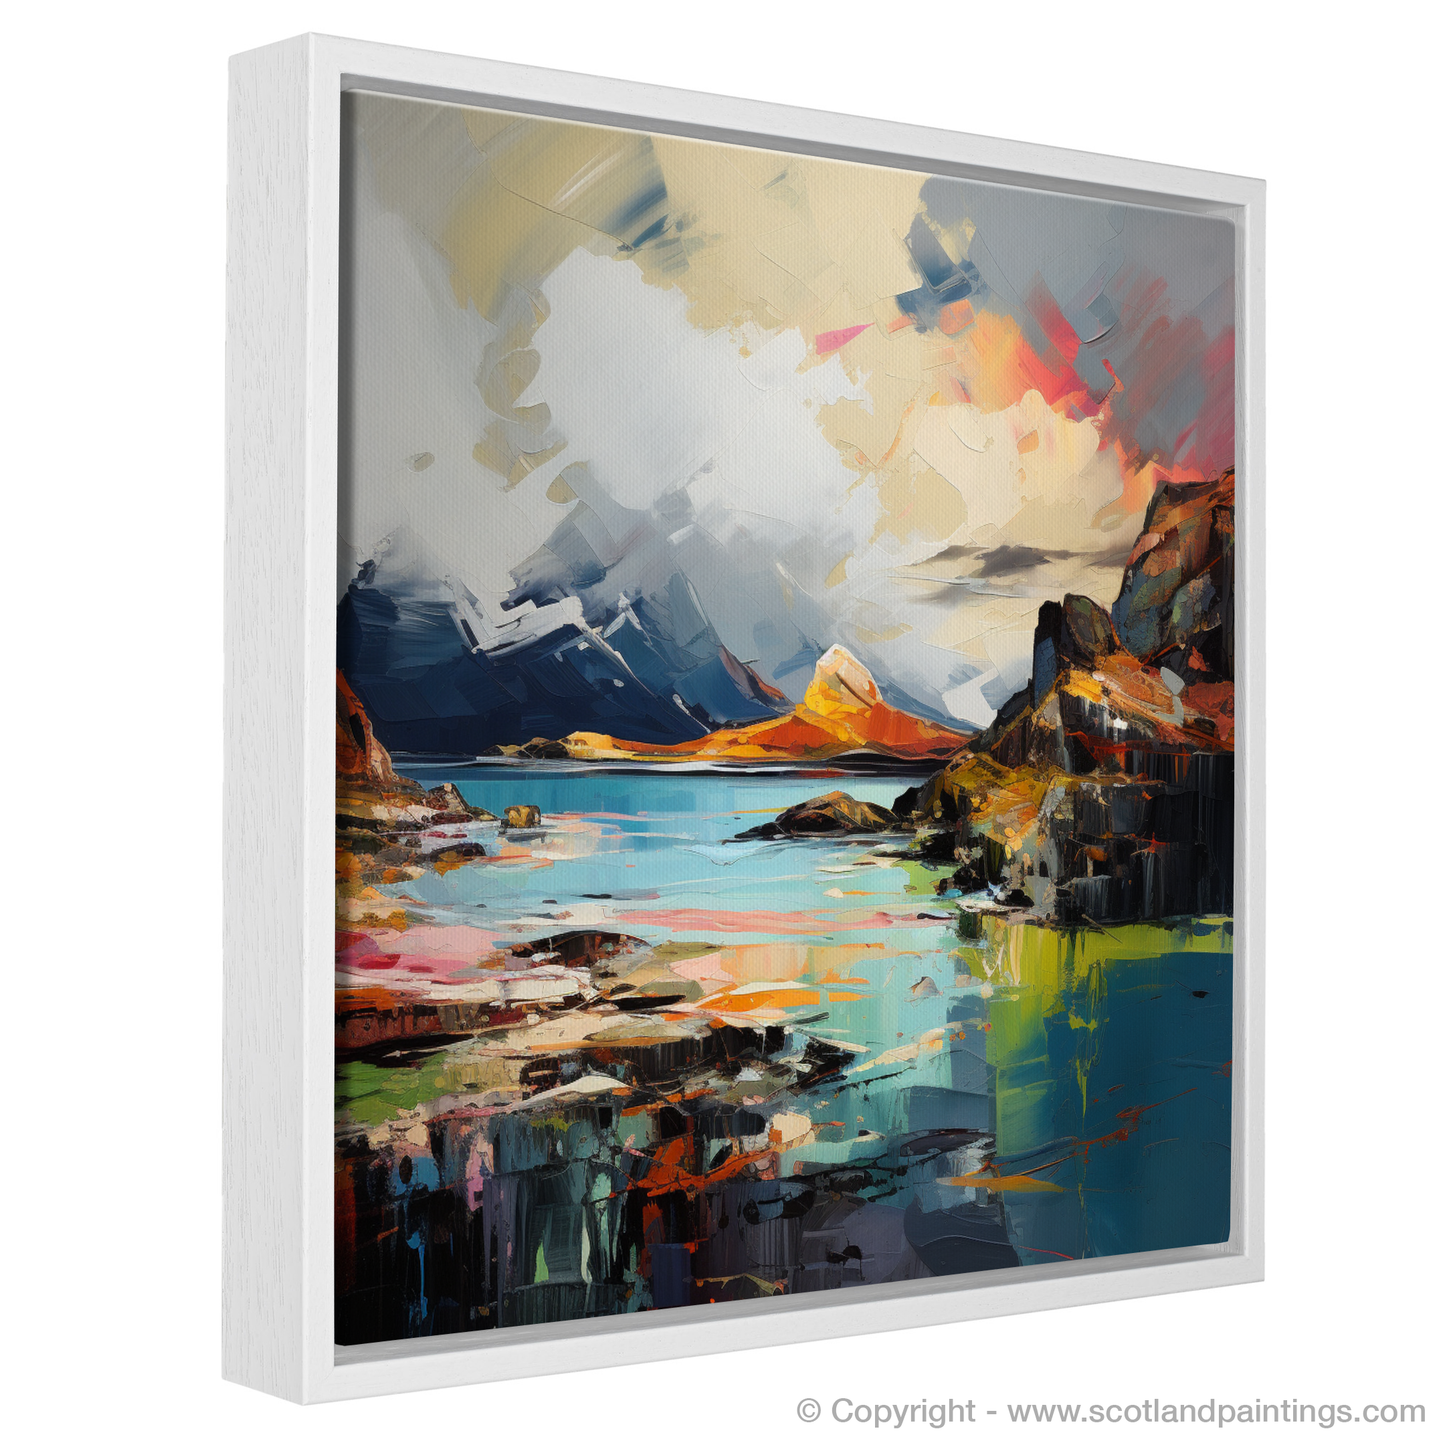 Painting and Art Print of Isle of Skye's smaller isles, Inner Hebrides entitled "Isle of Skye's Wild Isle Expression".